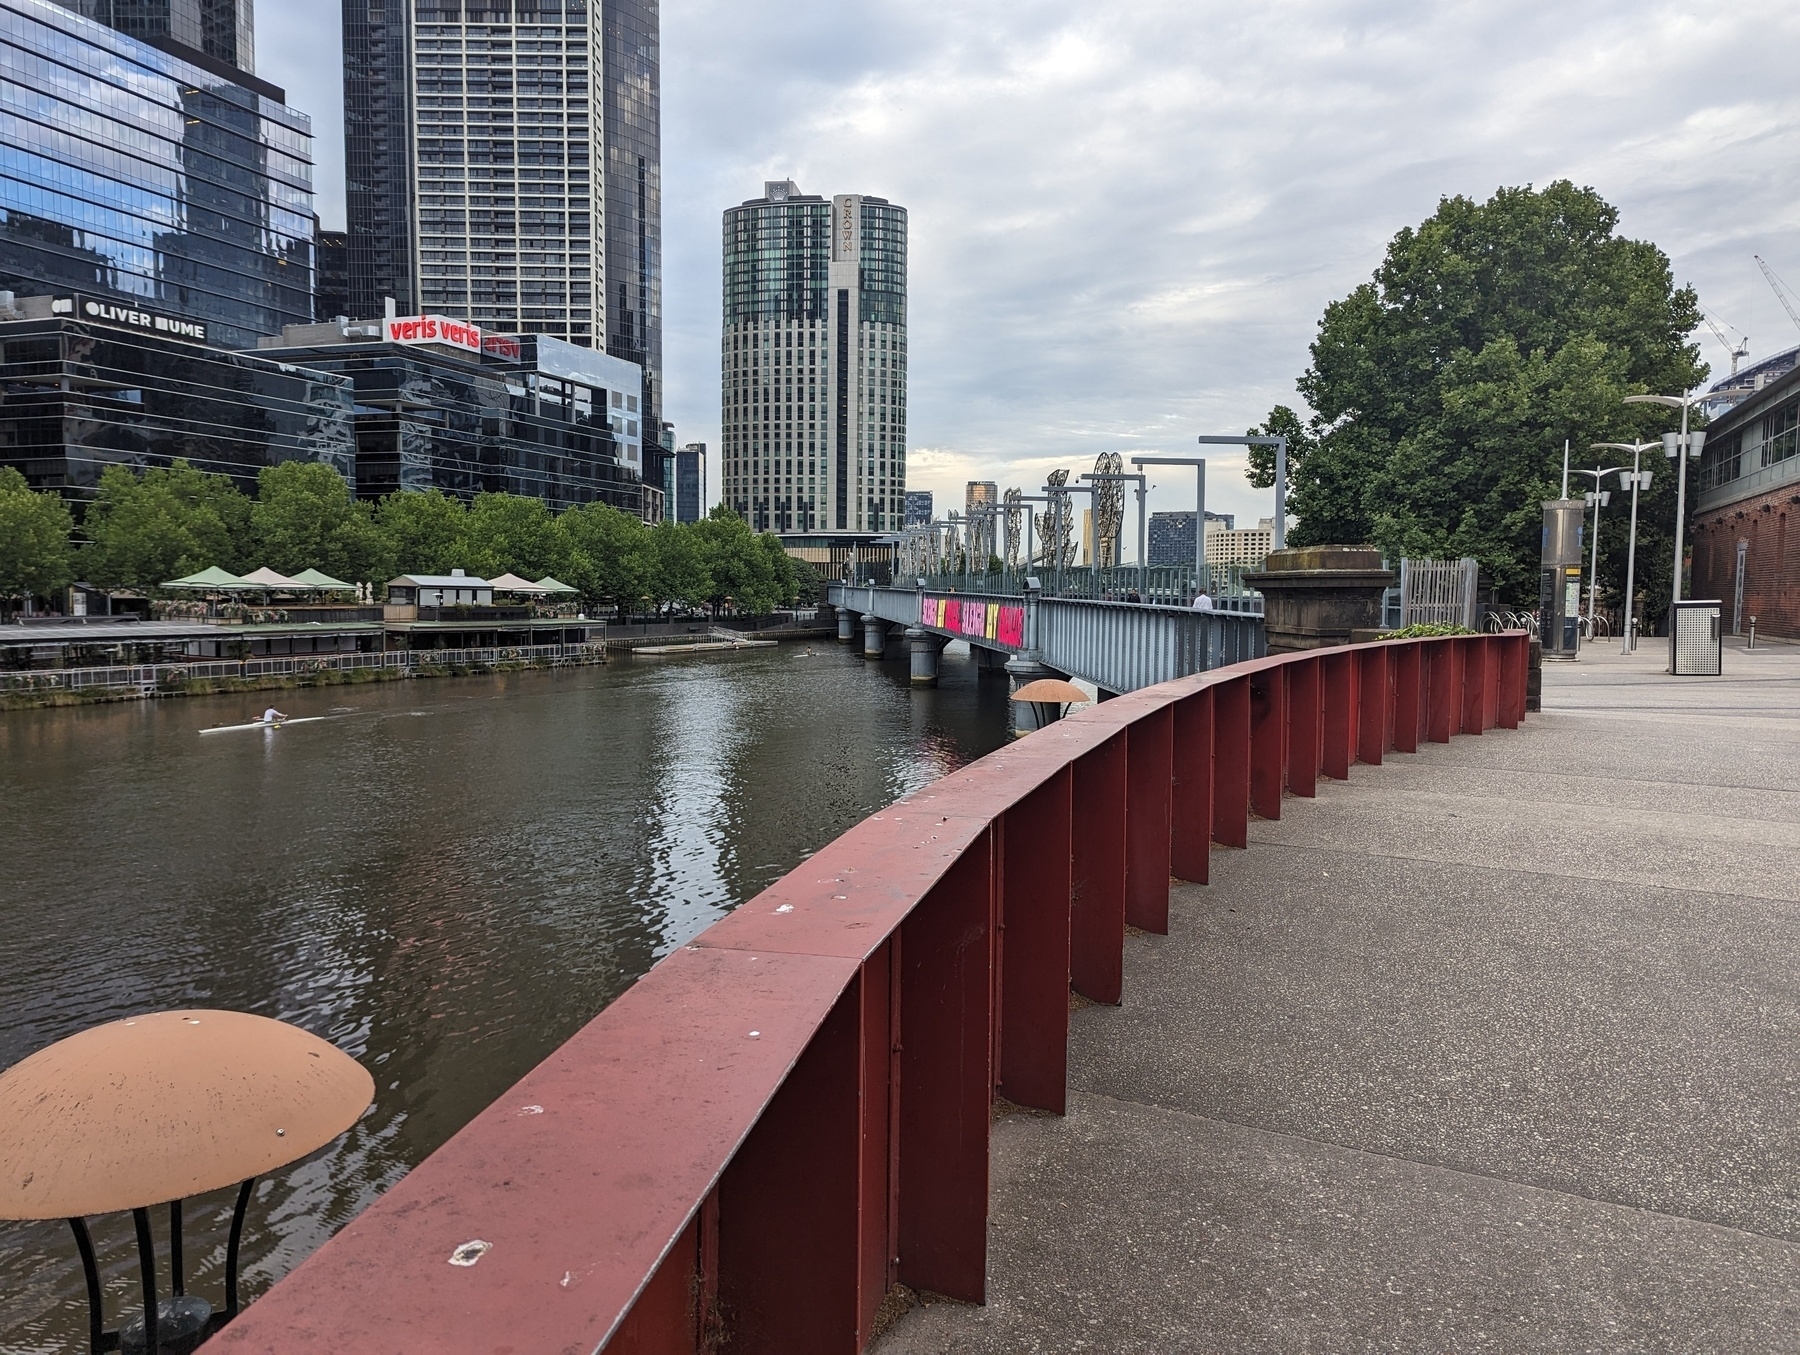 Concrete path with a metal railing beside a river leading to a bridge with skyscrapers in the background.